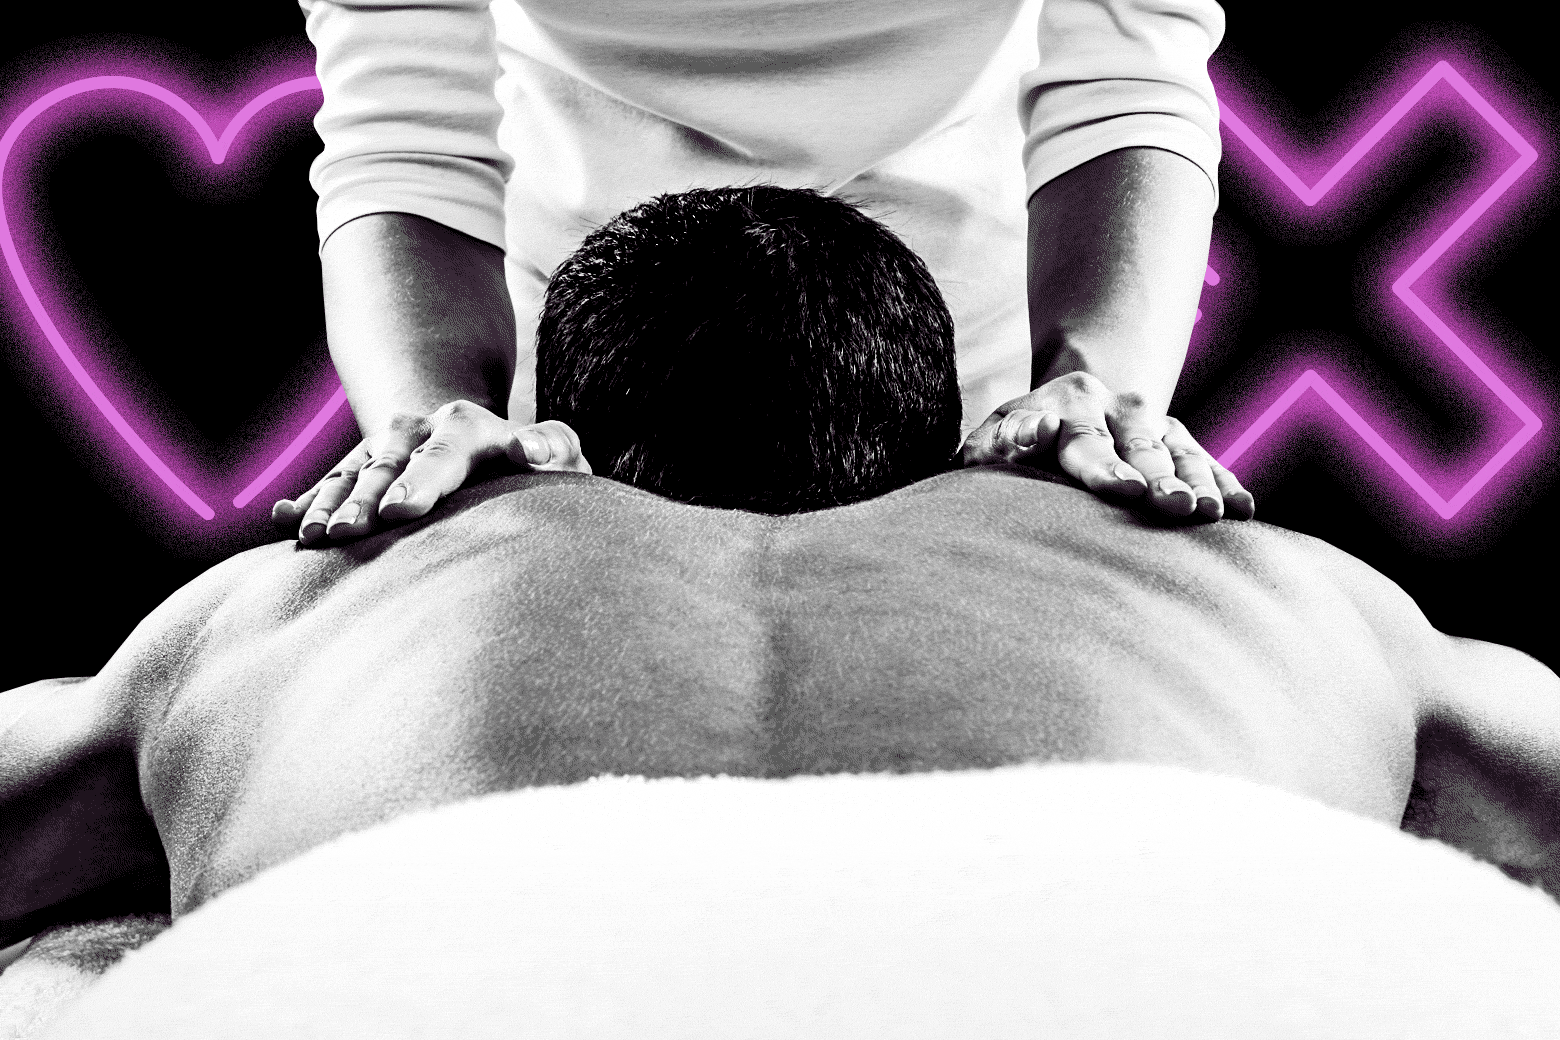 My wife shut down our sex life—is it wrong I go to massage parlors instead?